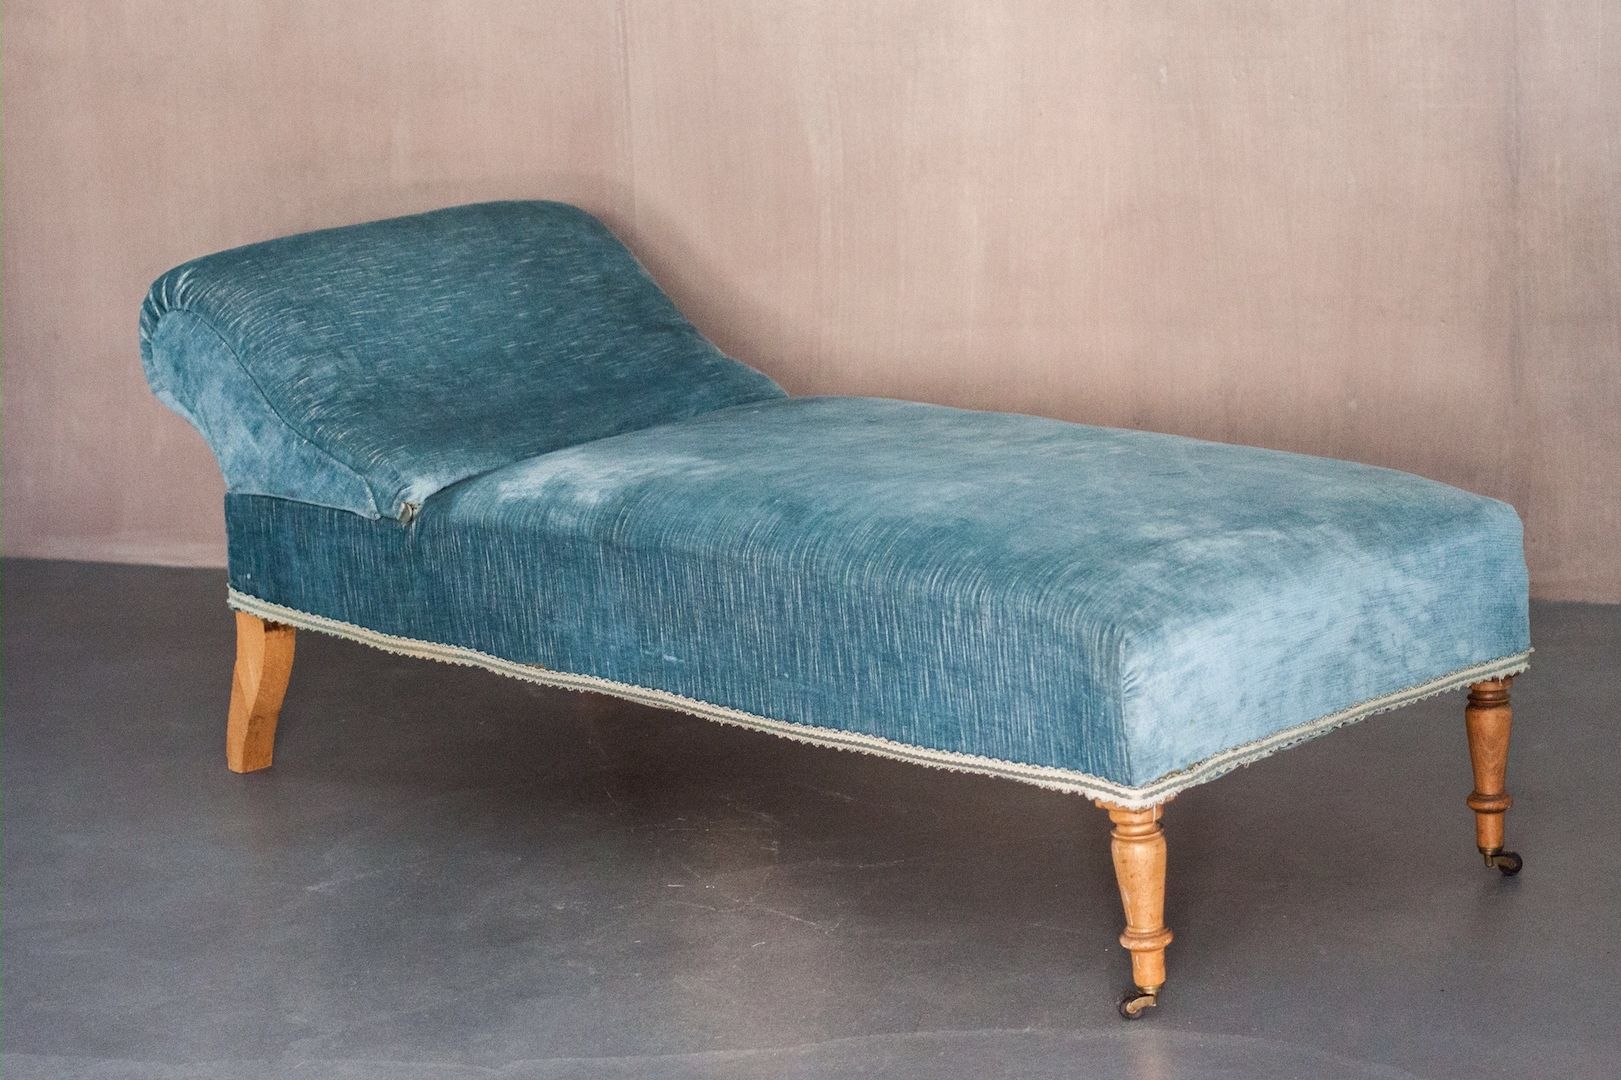 Vintage Chaise Lounges In Famous Vintage Chaise Lounge With Sky Blue Velvet Upholstery For Sale At (View 2 of 15)